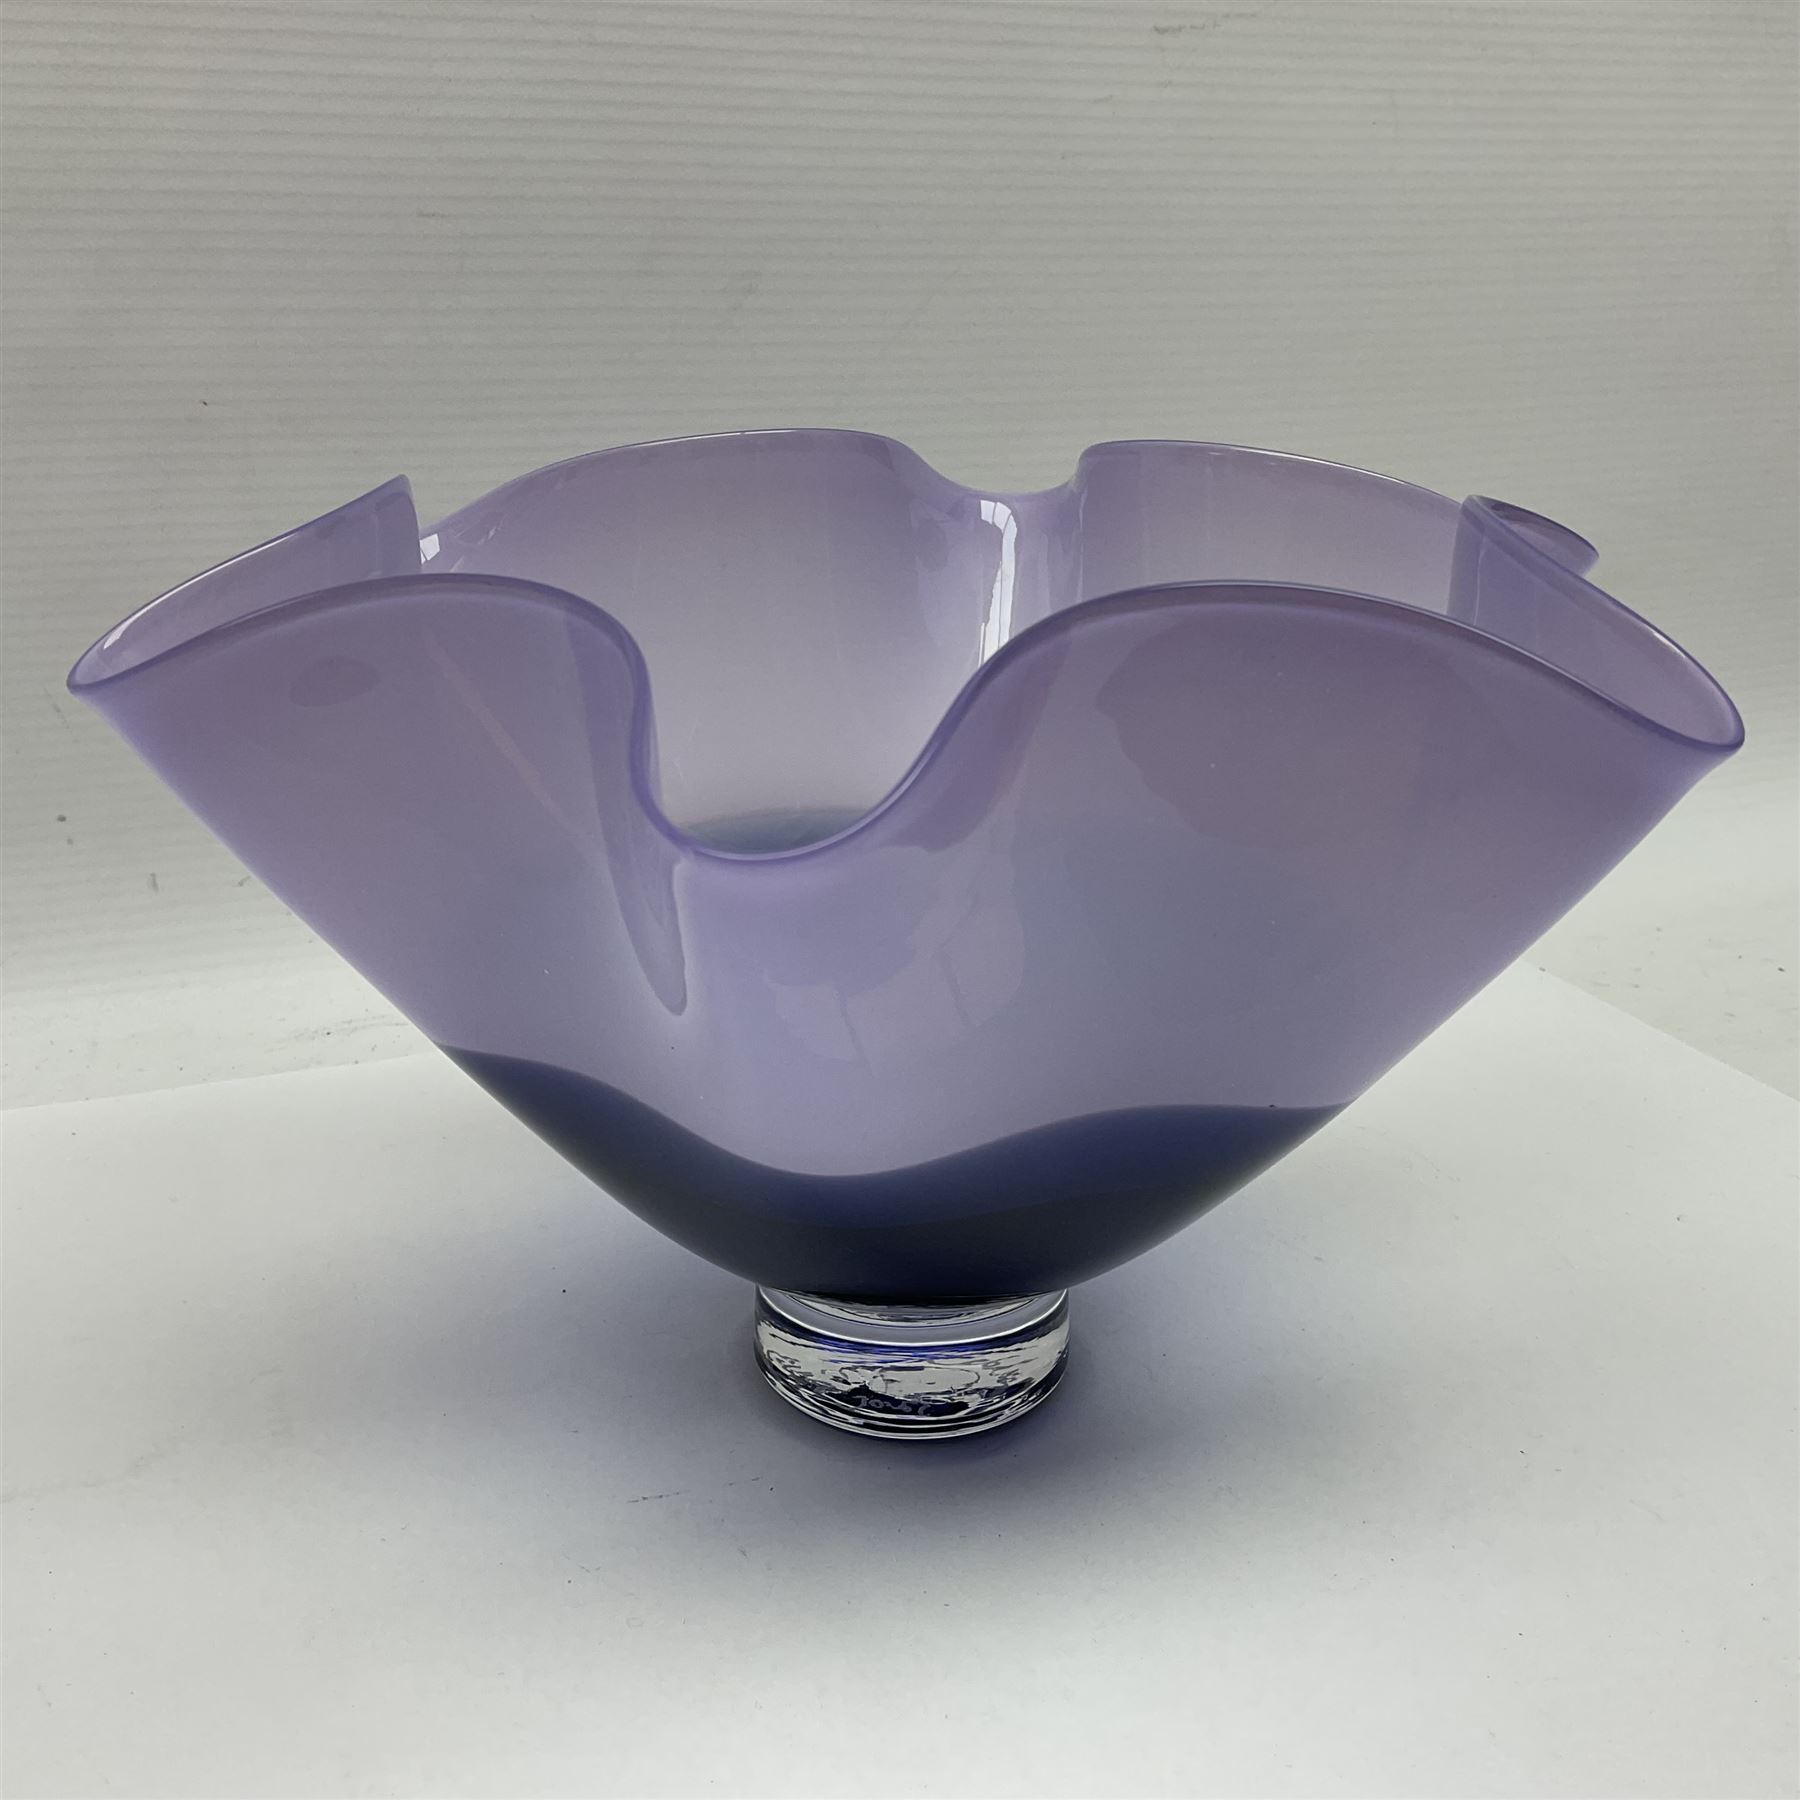 Gillies Jones of Rosedale two tone purple glass vase with crimped rim on a short pedestal foot - Image 5 of 7